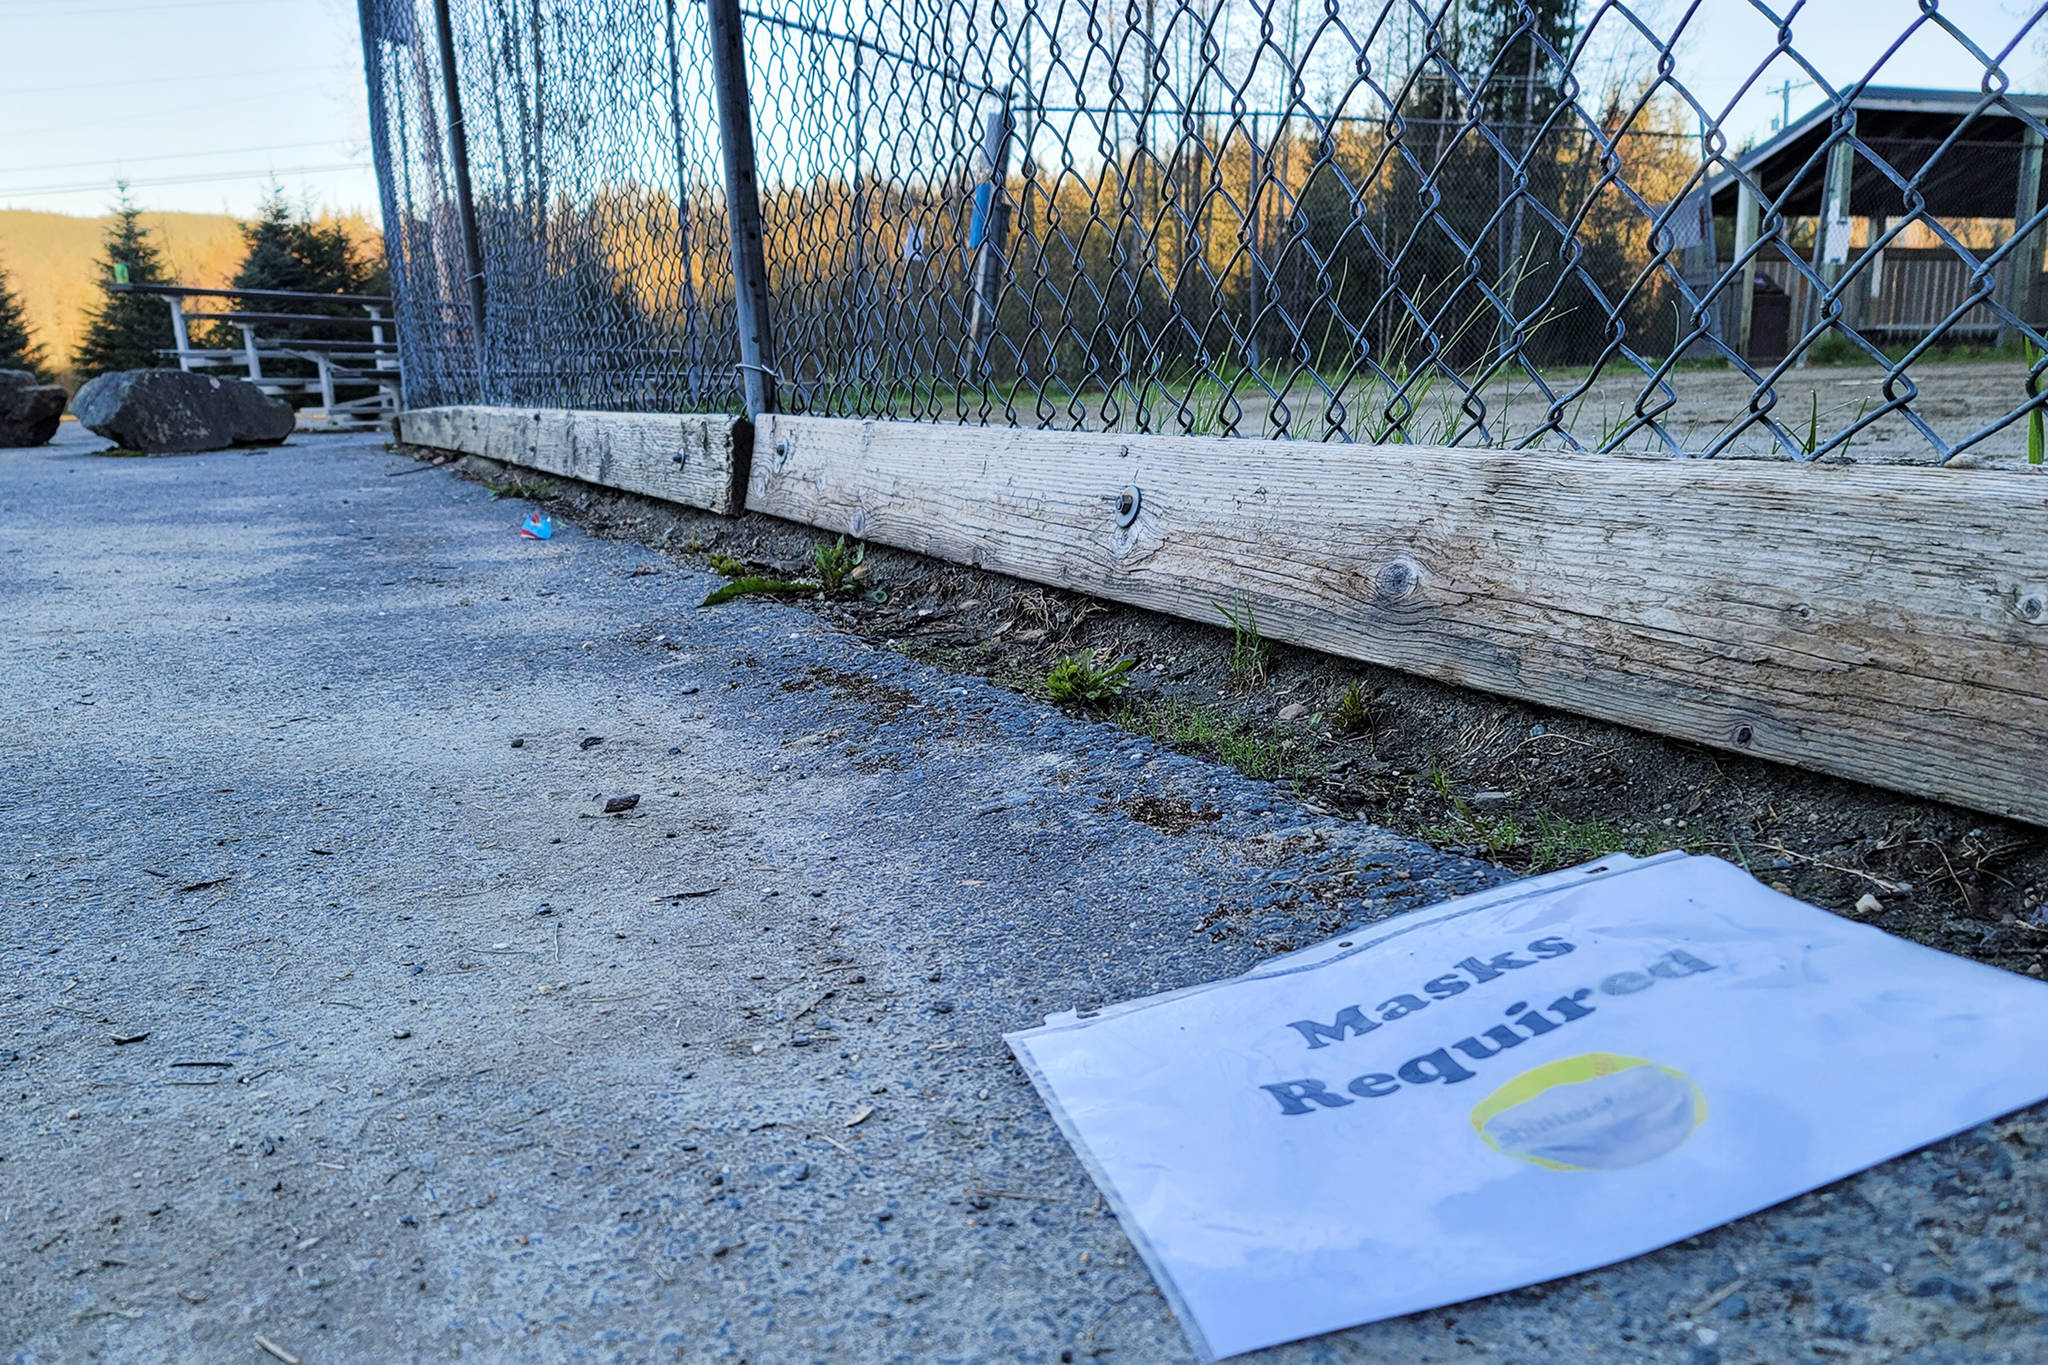 Ben Hohenstatt / Juneau Empire 
A sign reading “Masks Required” lies on the ground near a softball field at Melvin Park on Tuesday morning. In a community briefing, city officials clarified why the mask mandate changed last week and what to expect going forward.